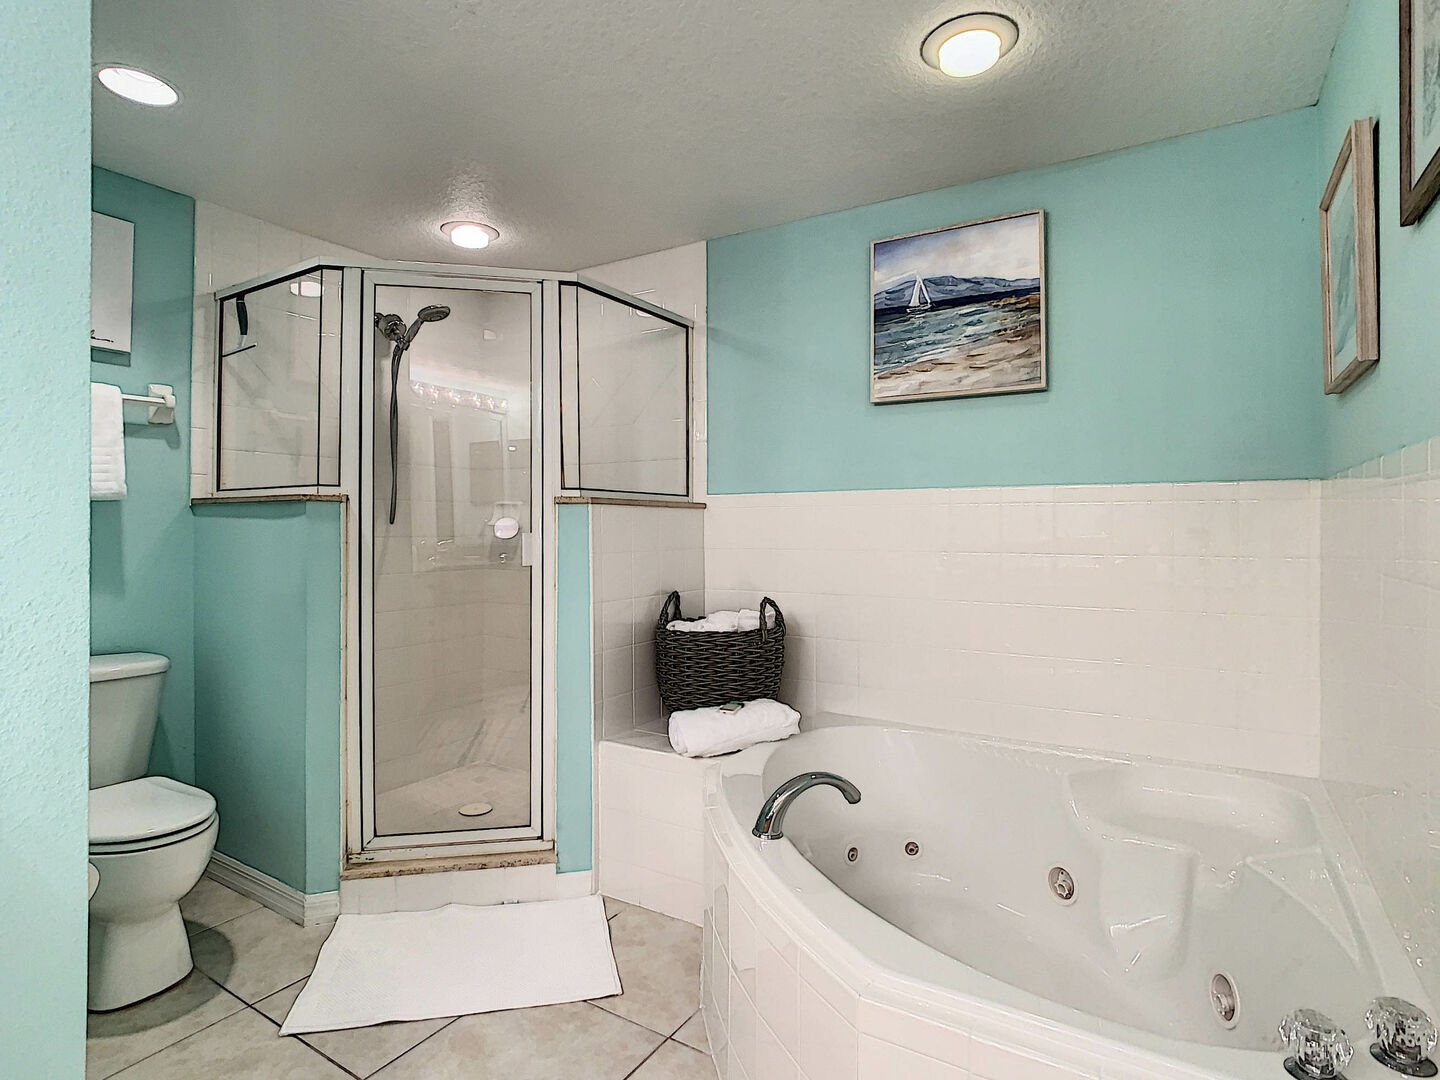 View of the bathroom - a walk in shower and a bathtub